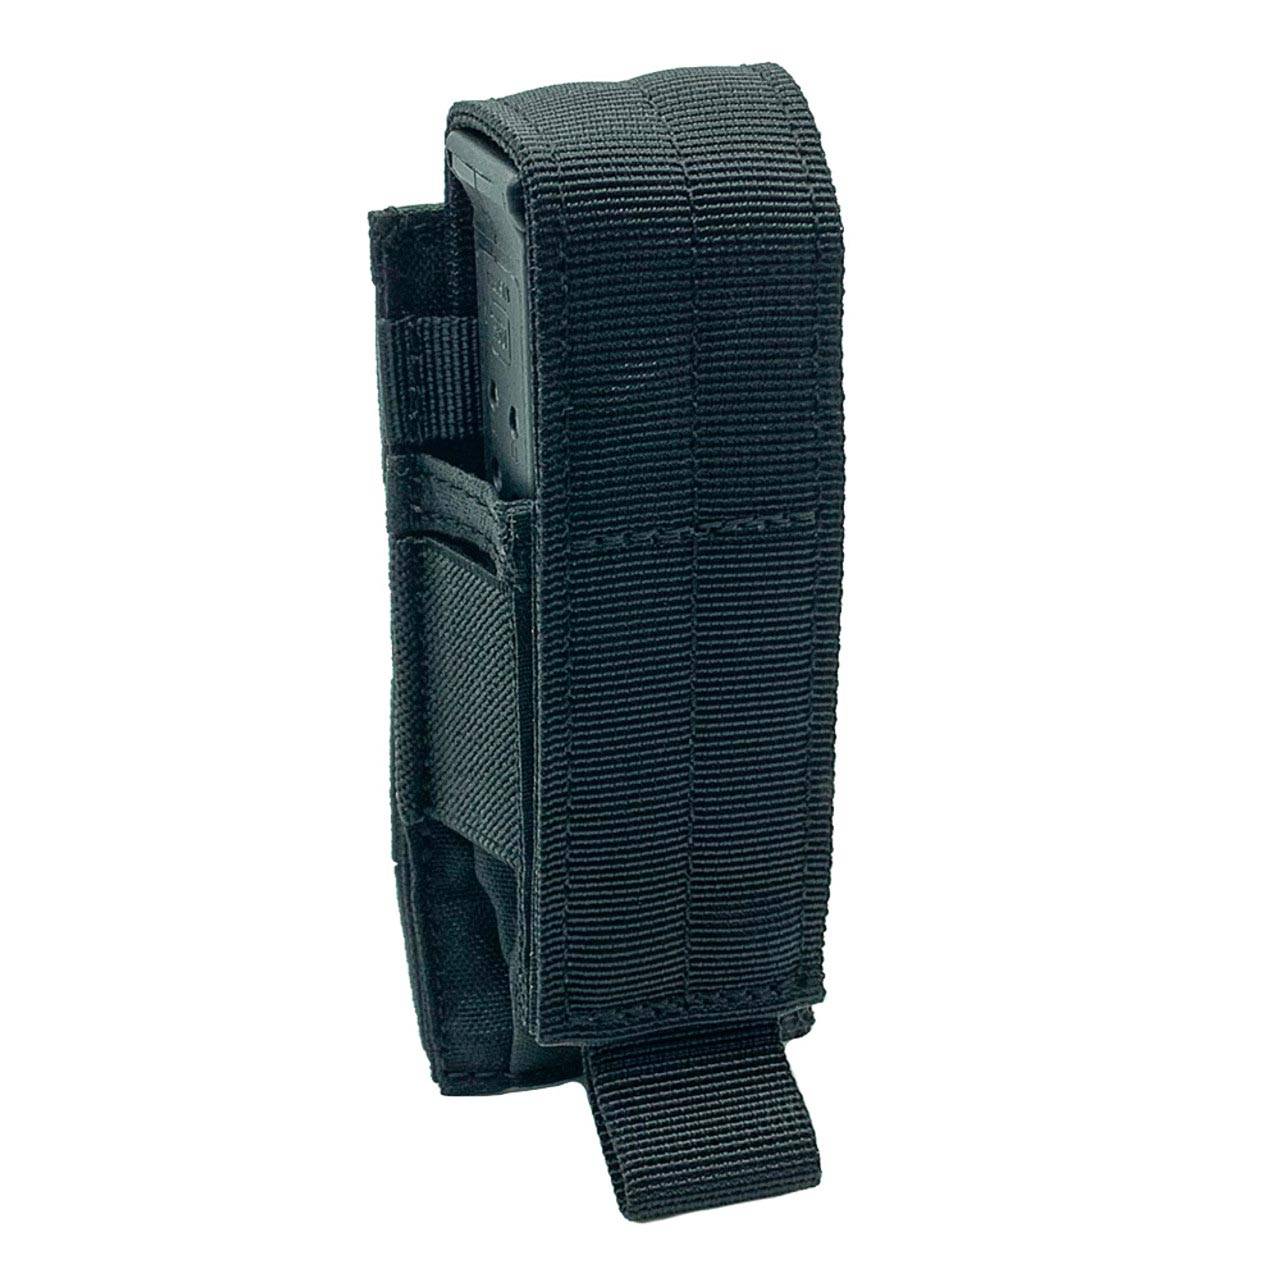 SHELLBACK TACTICAL THE SINGLE PISTOL MAG POUCH